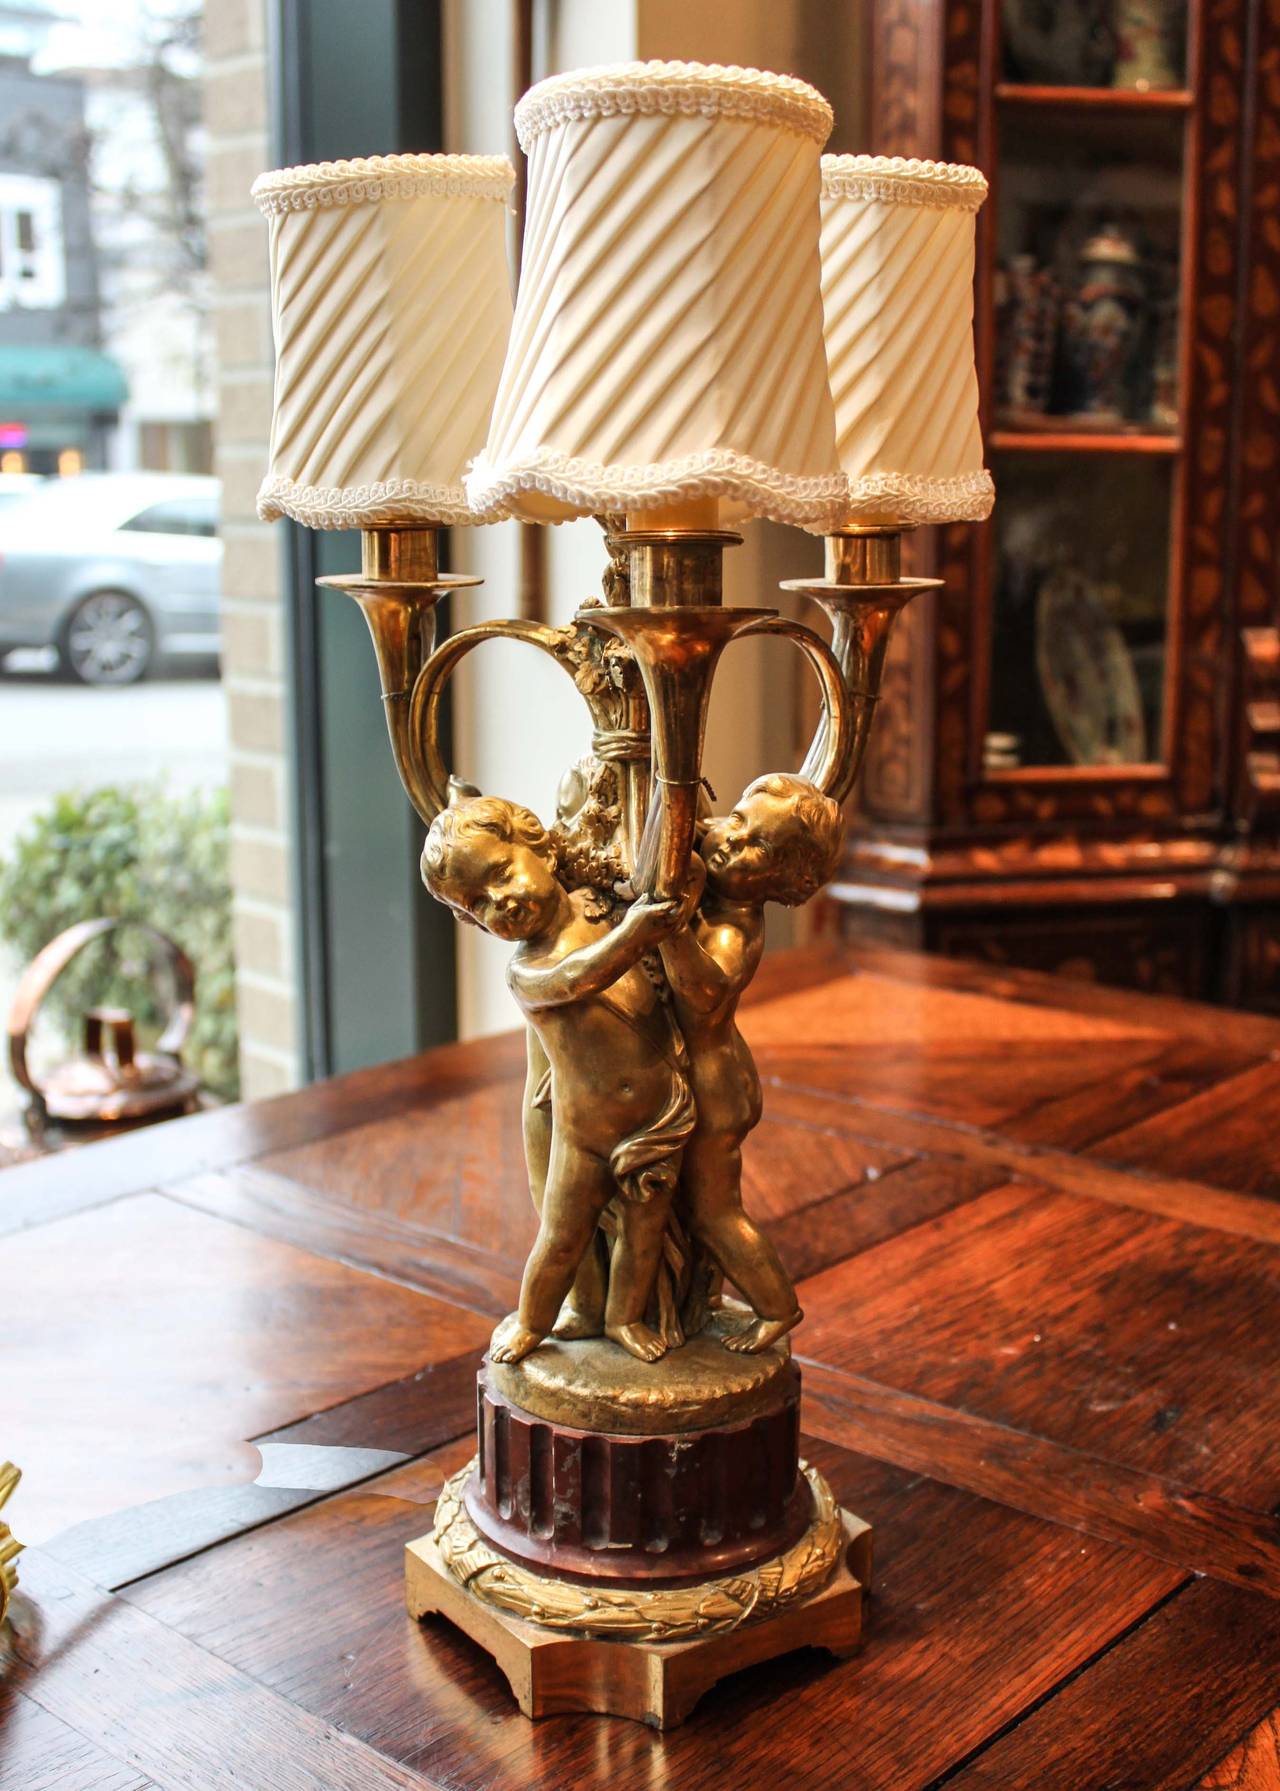 A gilt bronze lamp with beautifully cast cherubic figures supporting three looped candelabra arms. Wired for electricity at a later date, this lamp is otherwise original with a natural patina only attained with age. 

Measures: 5.5